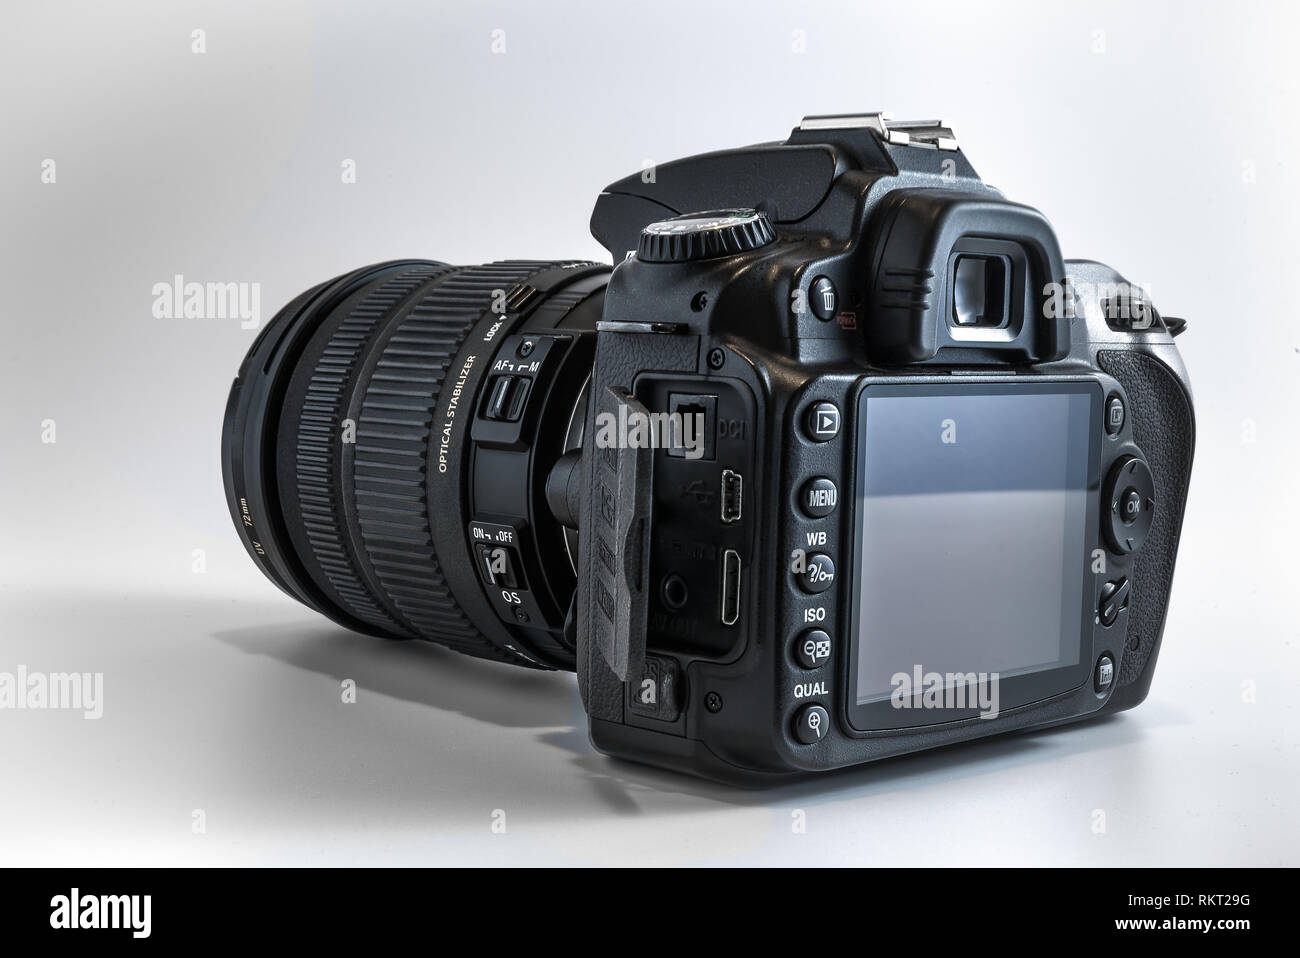 Close-up of a professional digital dslr camera for photography students, freelance photo journalism, photographic bloggers or travel photographers Stock Photo